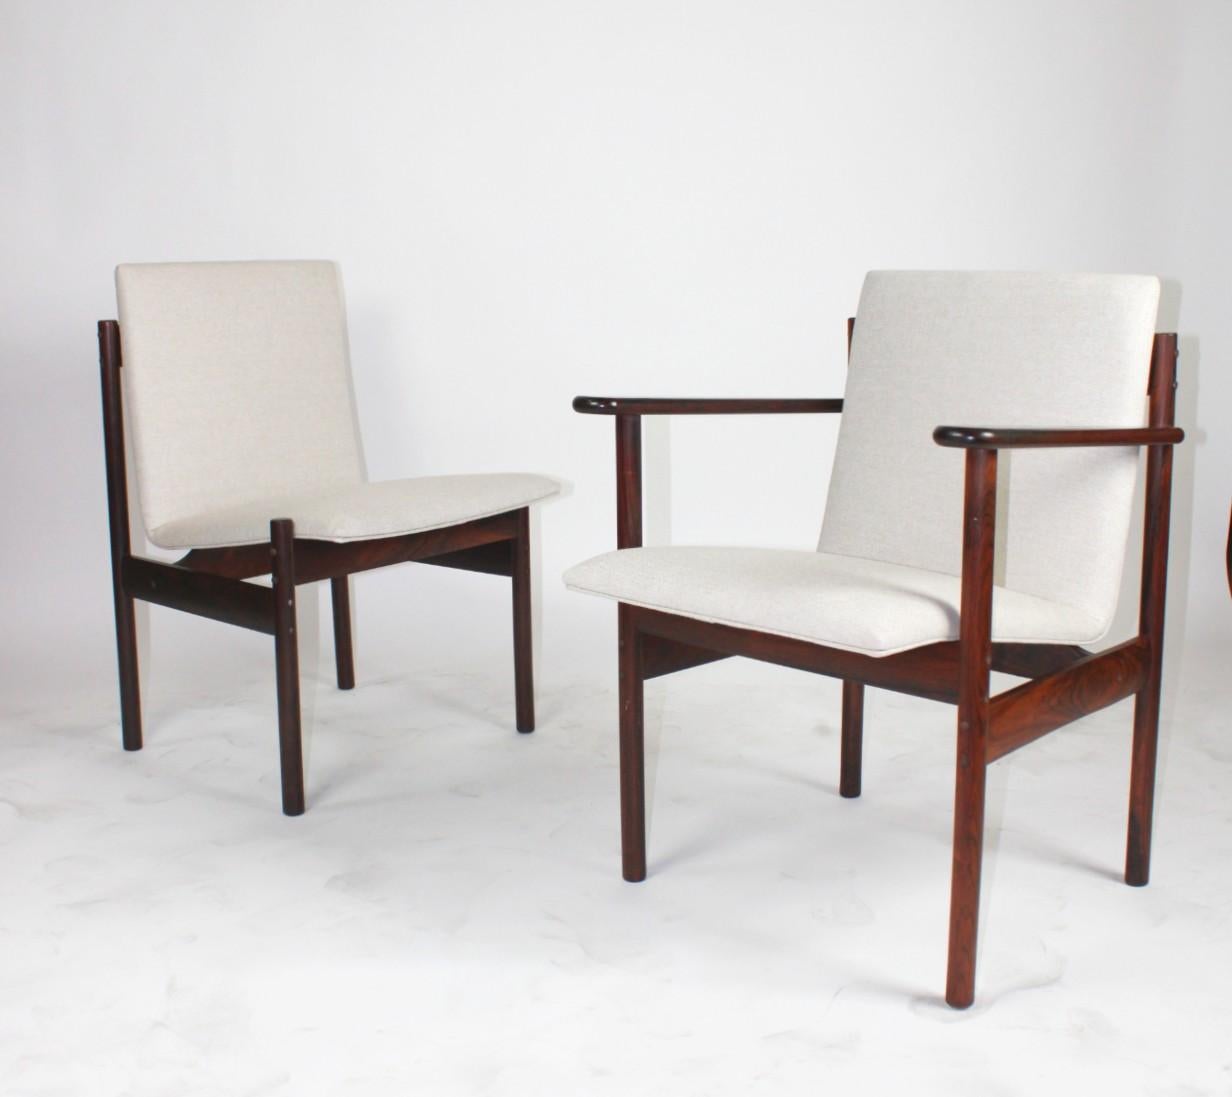 20th Century Rosewood Chairs by Sven Ivar Dysthe for Dokka Møbler, set of 4